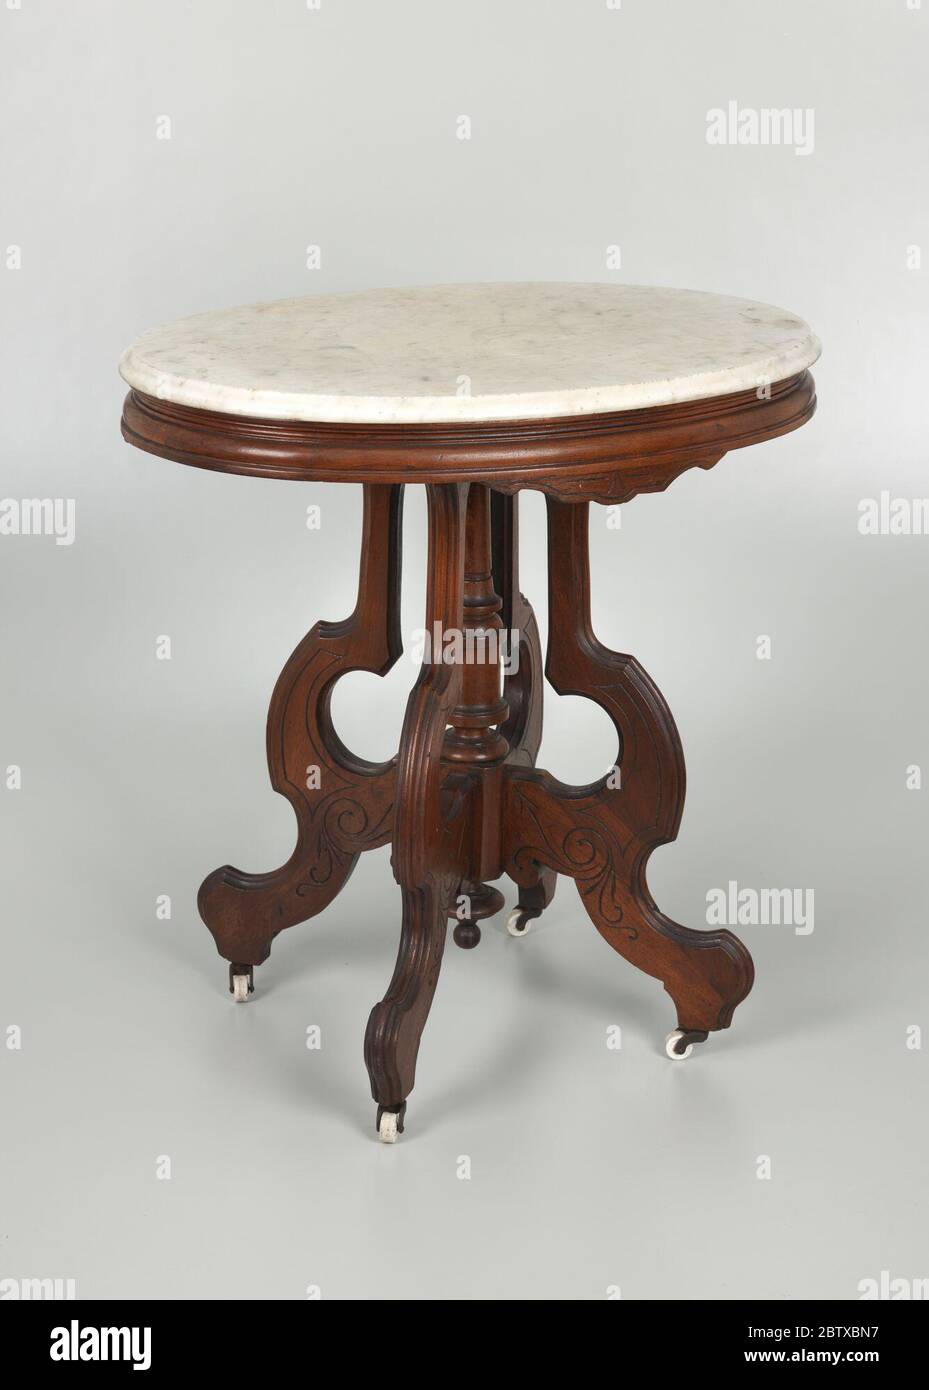 Marbletop table from the home of Robert Smalls. A Victorian Era oval marble-top table made of walnut with a 7/8' thick detachable top resting on an oval-shaped wood frame. The legs are s-formed with a decorative spindle connecting the legs at the bottom portion of the central post. Stock Photo